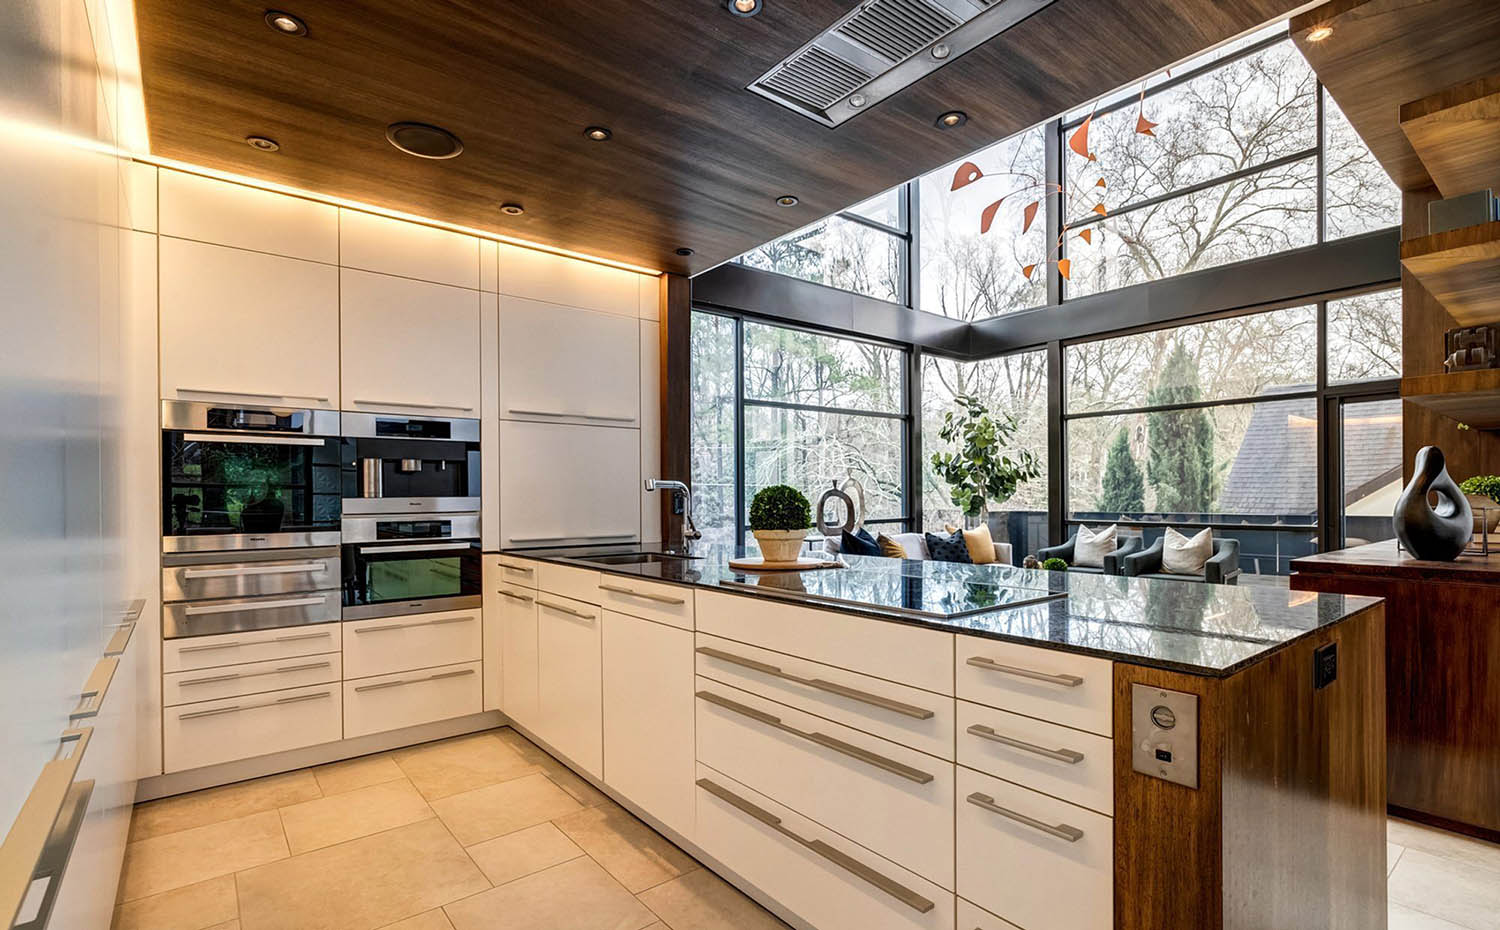 Ultra modern kitchen with cream colored cabinets and real wood.